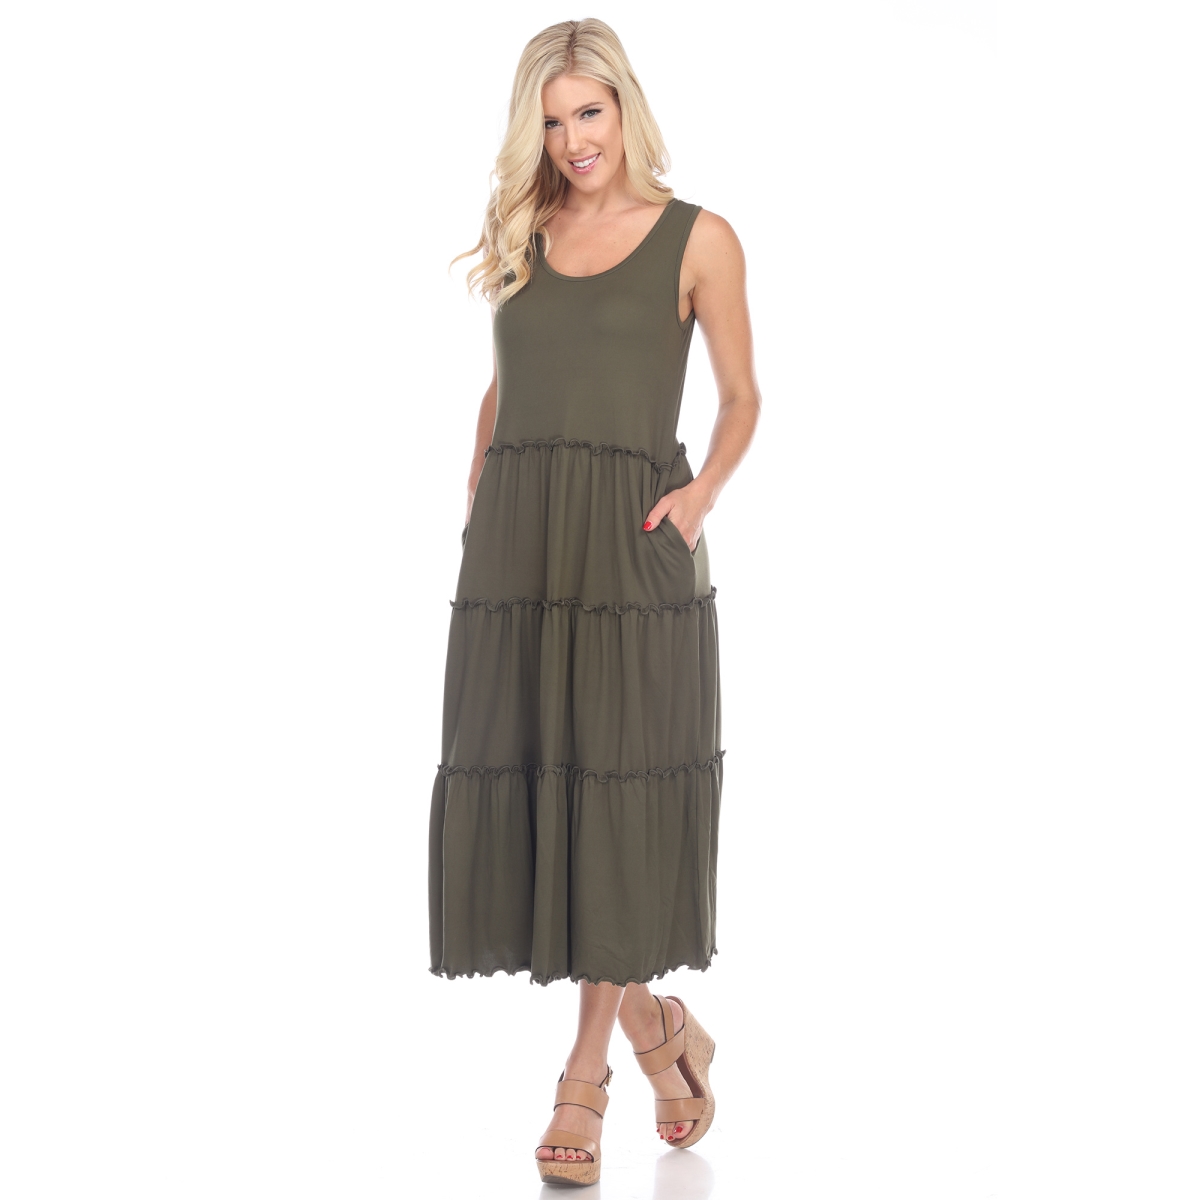 Picture of White Mark 315-02-L Olive Scoop Neck Teired Midi Dress - Large